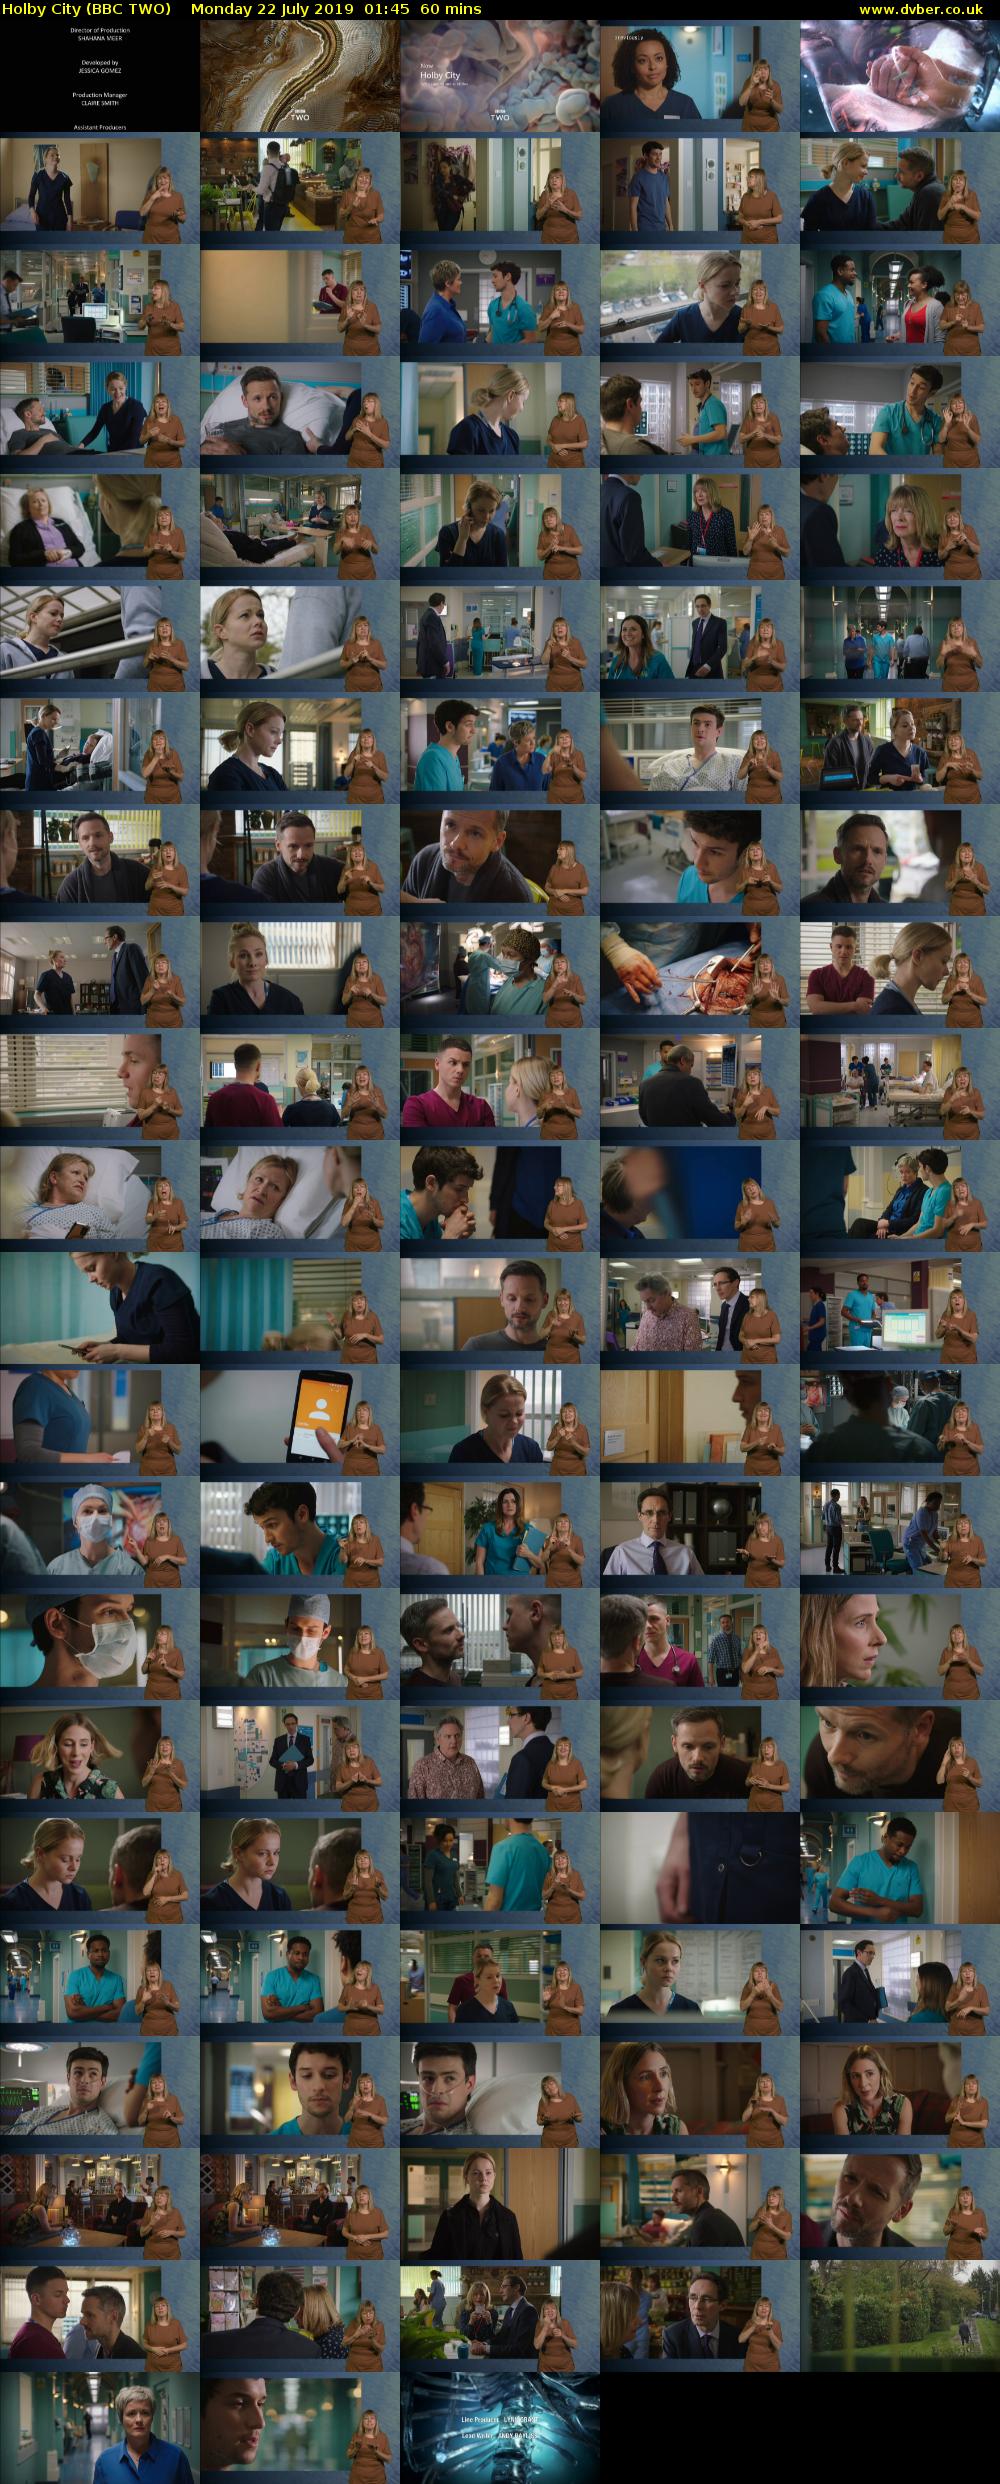 Holby City (BBC TWO) Monday 22 July 2019 01:45 - 02:45